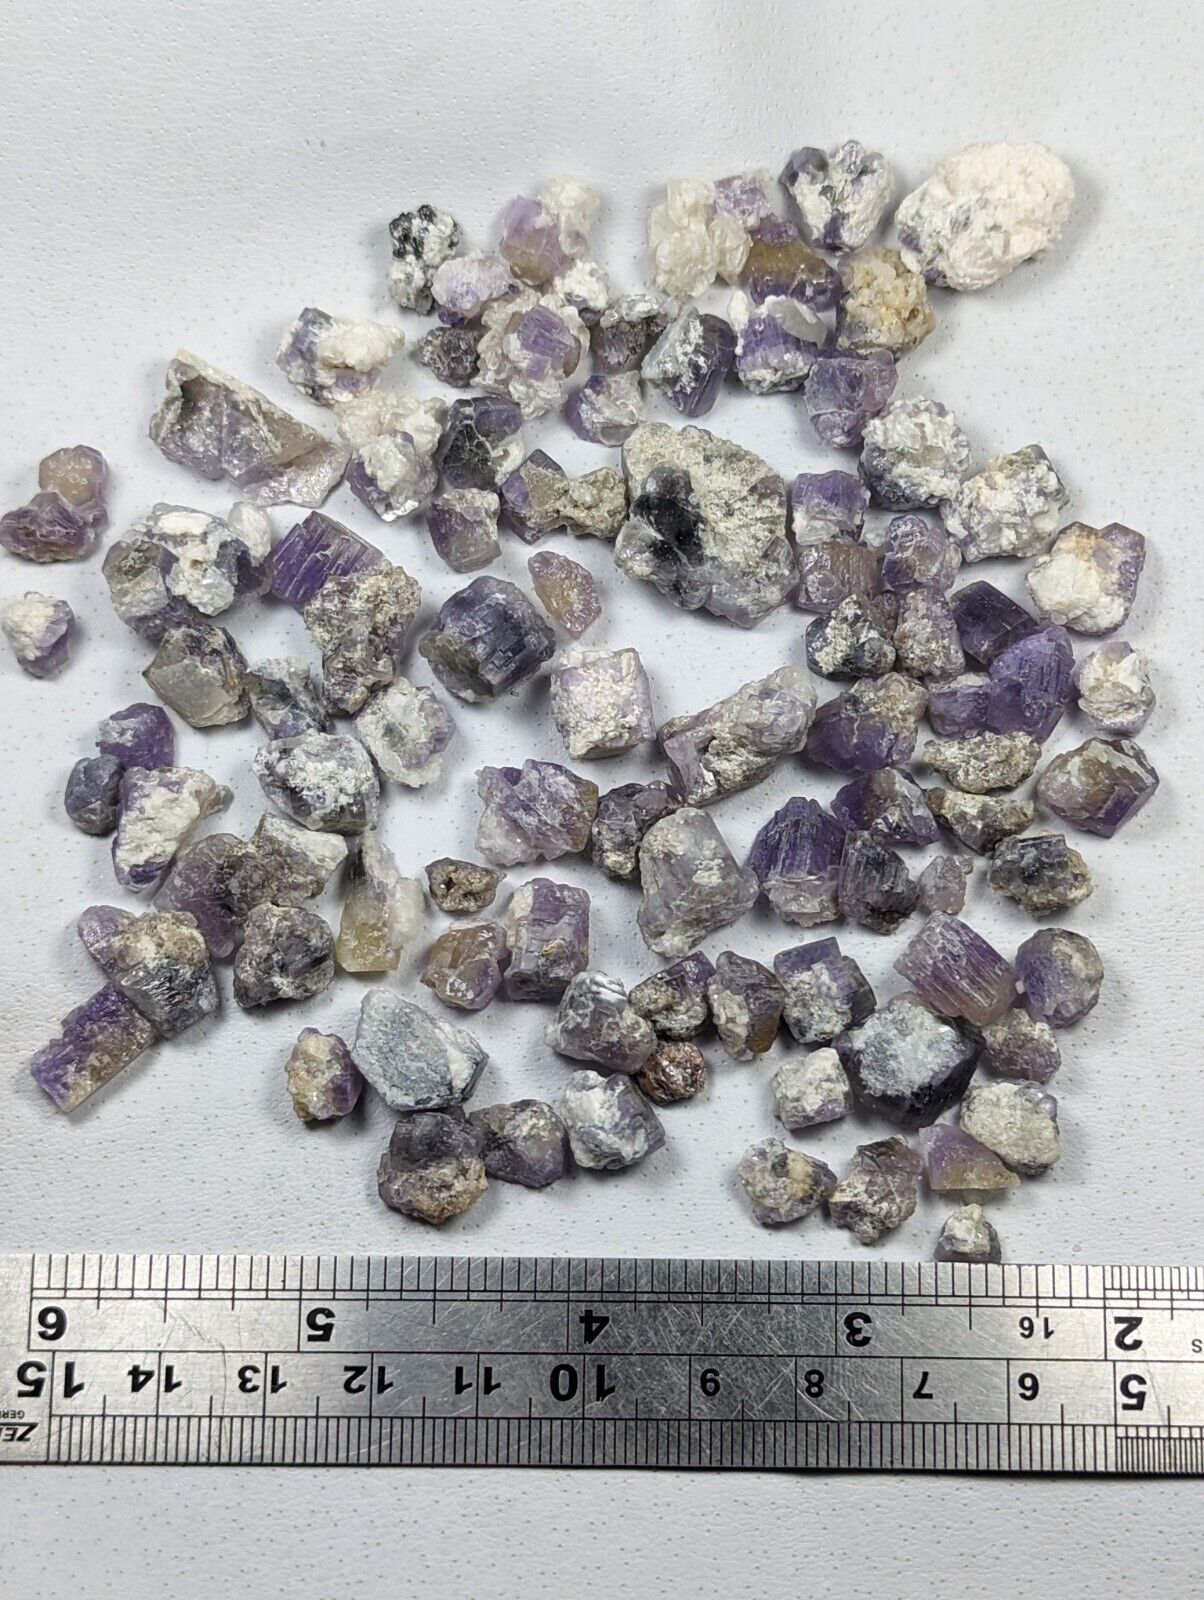 90grams Purple Apatite Tiny Crystals From Afghanistan.